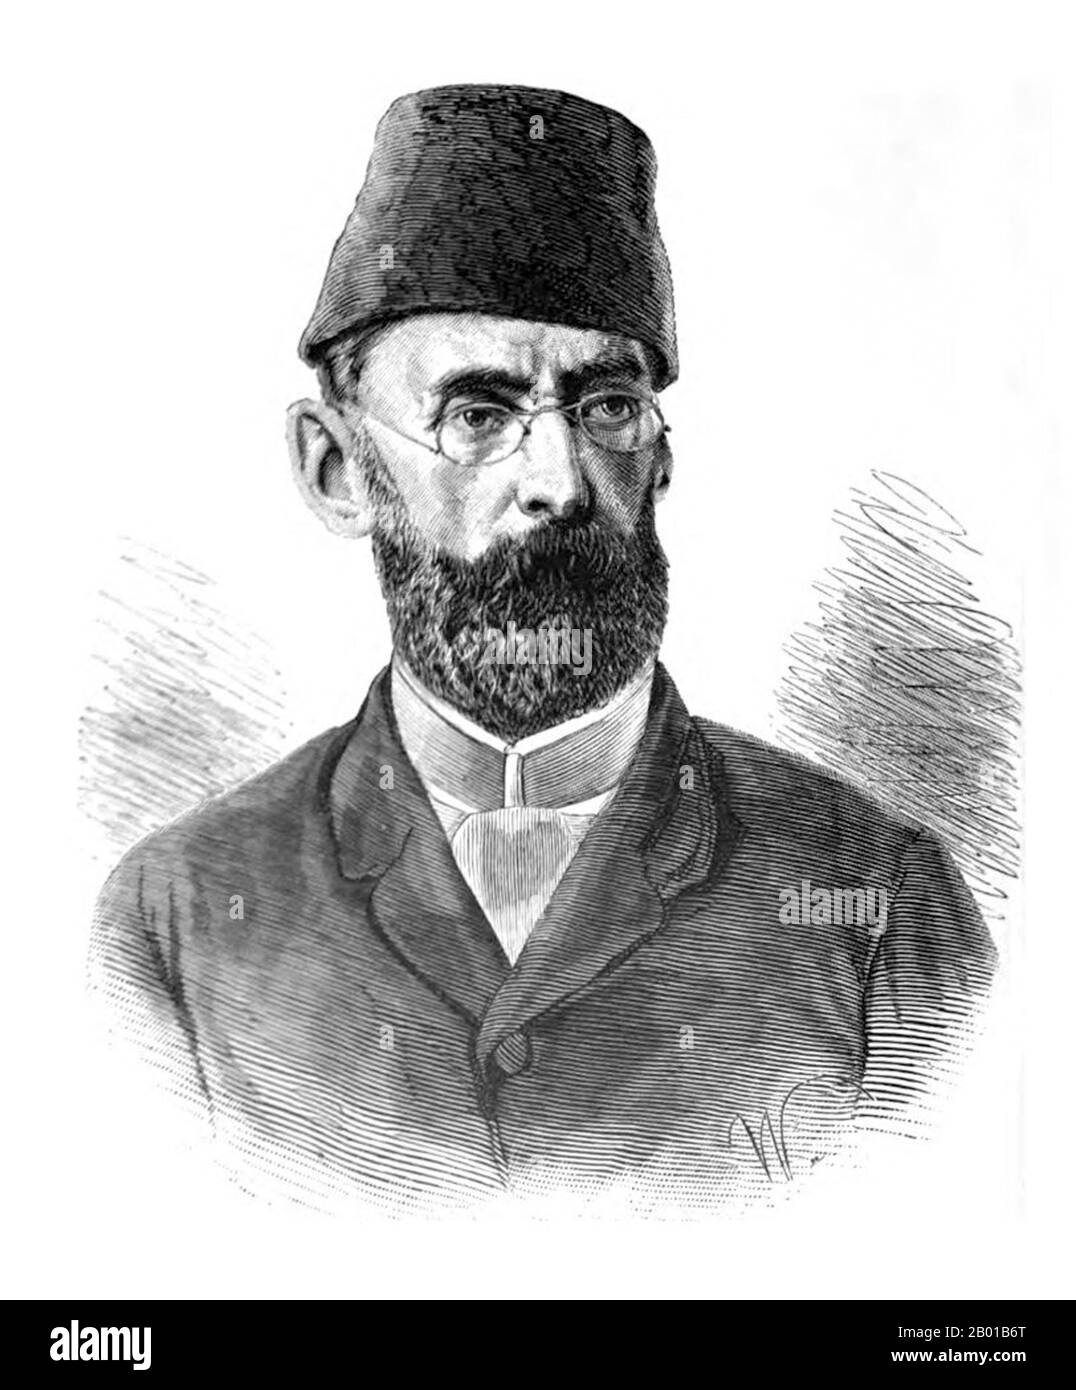 South Sudan: Mehmet Emin Pasha (28 March 1840 - 23 October 1892), physician, naturalist and governor of Equatoria. Portrait, 1892.  Mehmet Emin Pasha, born Isaak Eduard Schnitzer, was an Ottoman physician of German Jewish origin, who served as governor of the Egyptian province of Equatoria (modern southern South Sudan).  Emin Pasha was appointed as governor of Equatoria by the Khedive of Egypt in 1878. The Mahdist War that began in 1881 cut Equatoria off from the outside world by 1883. Emin was rescued by Henry Morton Stanley and the Emin Pasha Relief Expedition in 1888. Stock Photo